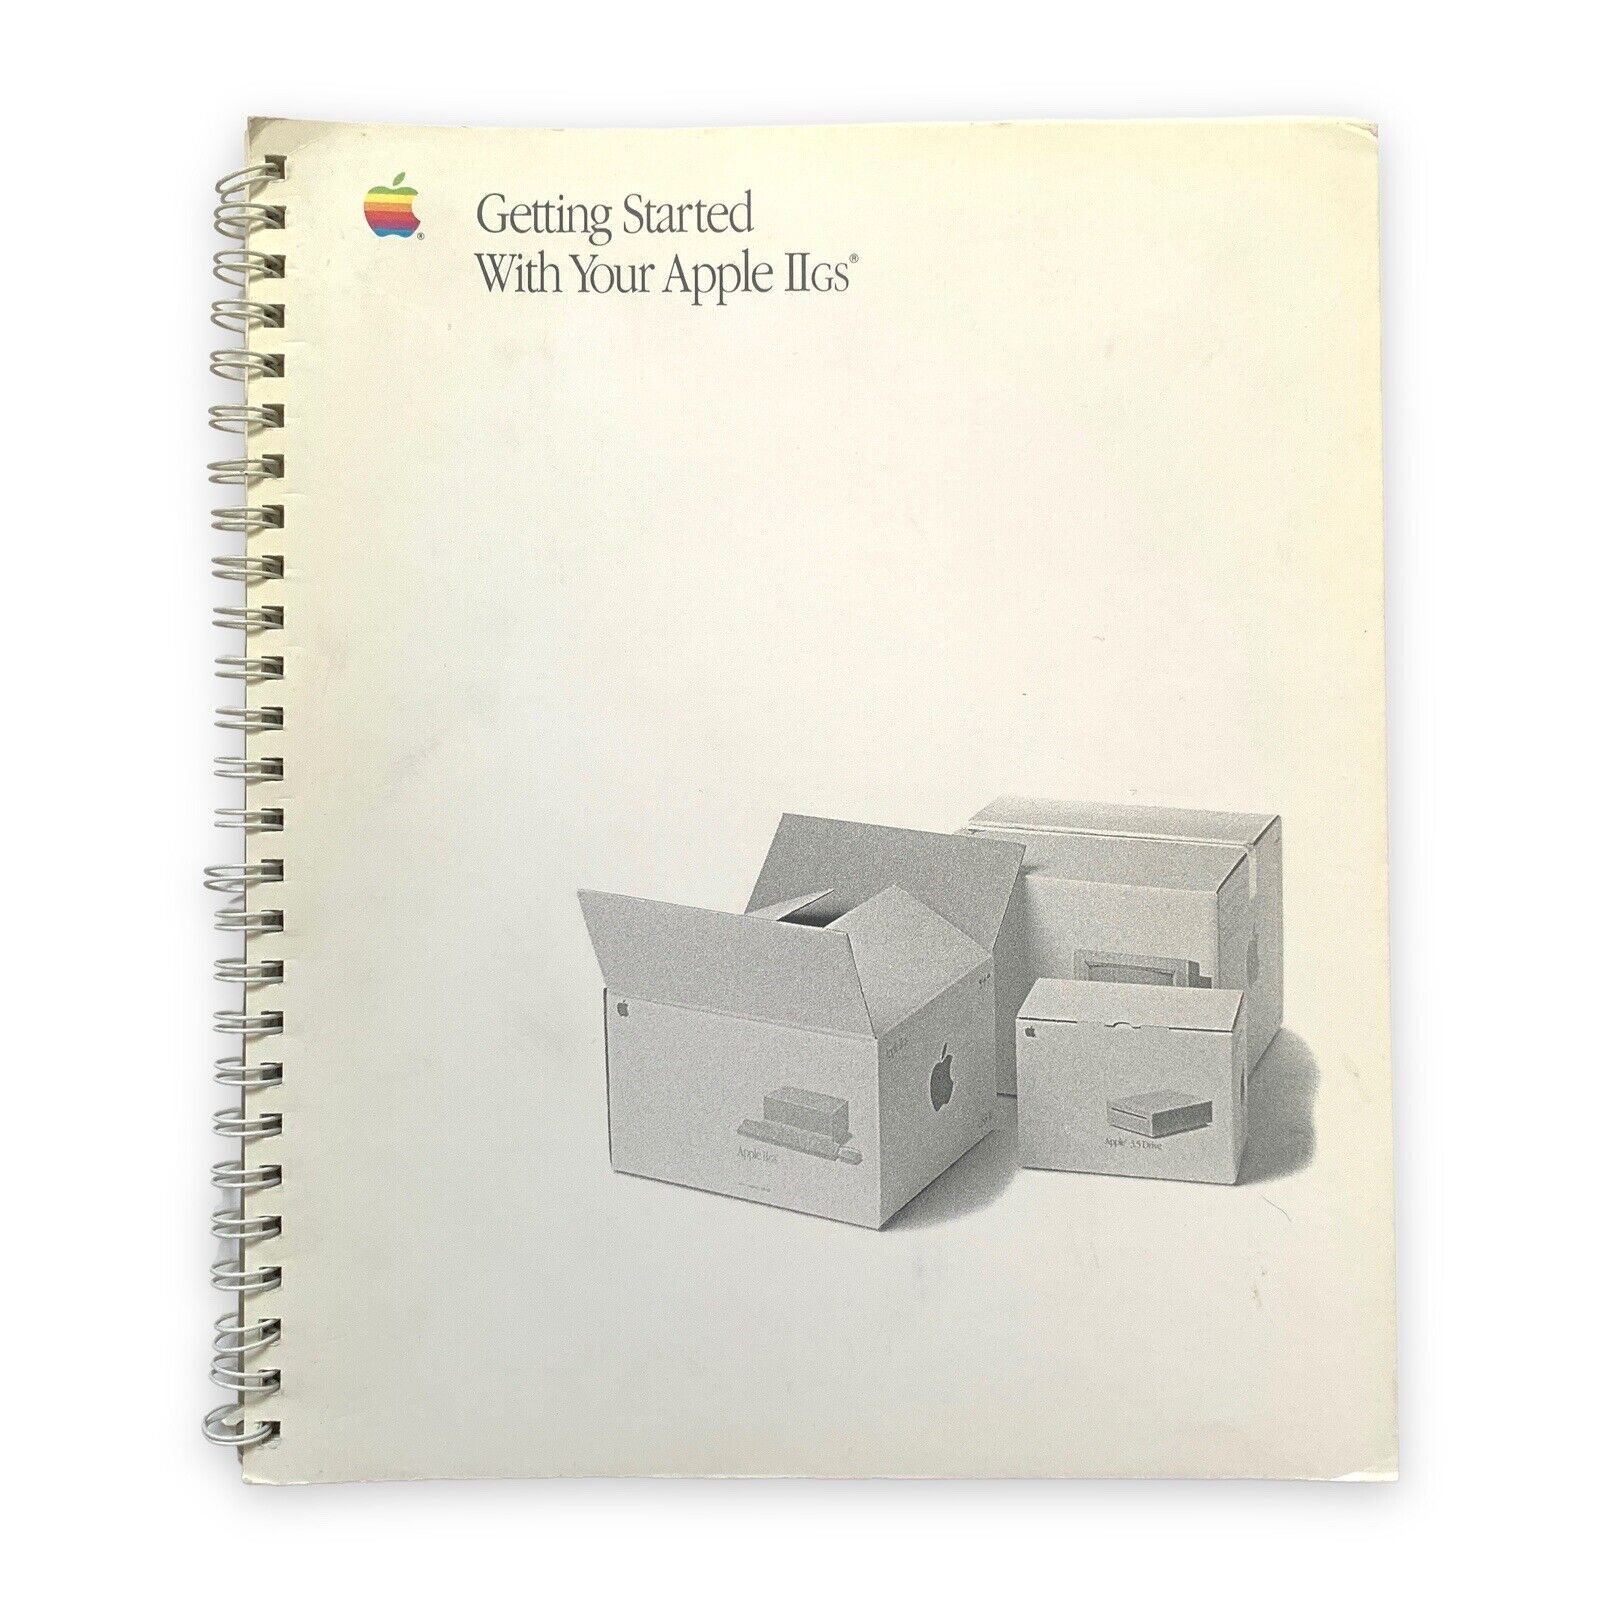 Getting Started With Your Apple IIGS II GS Manual VTG 1989 